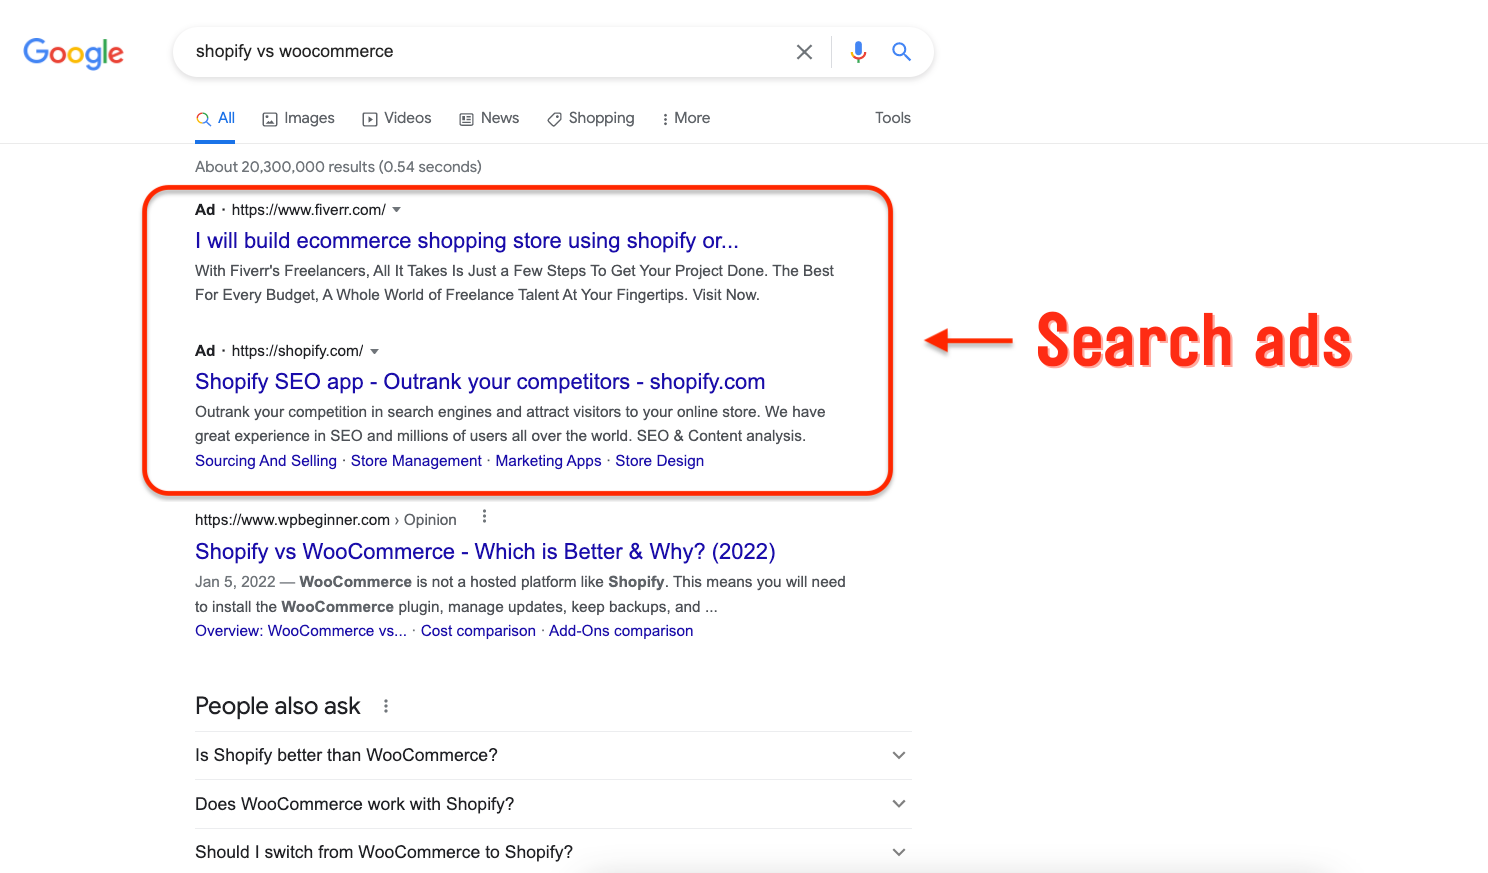 How Search ads looks like in Google Search results (1)